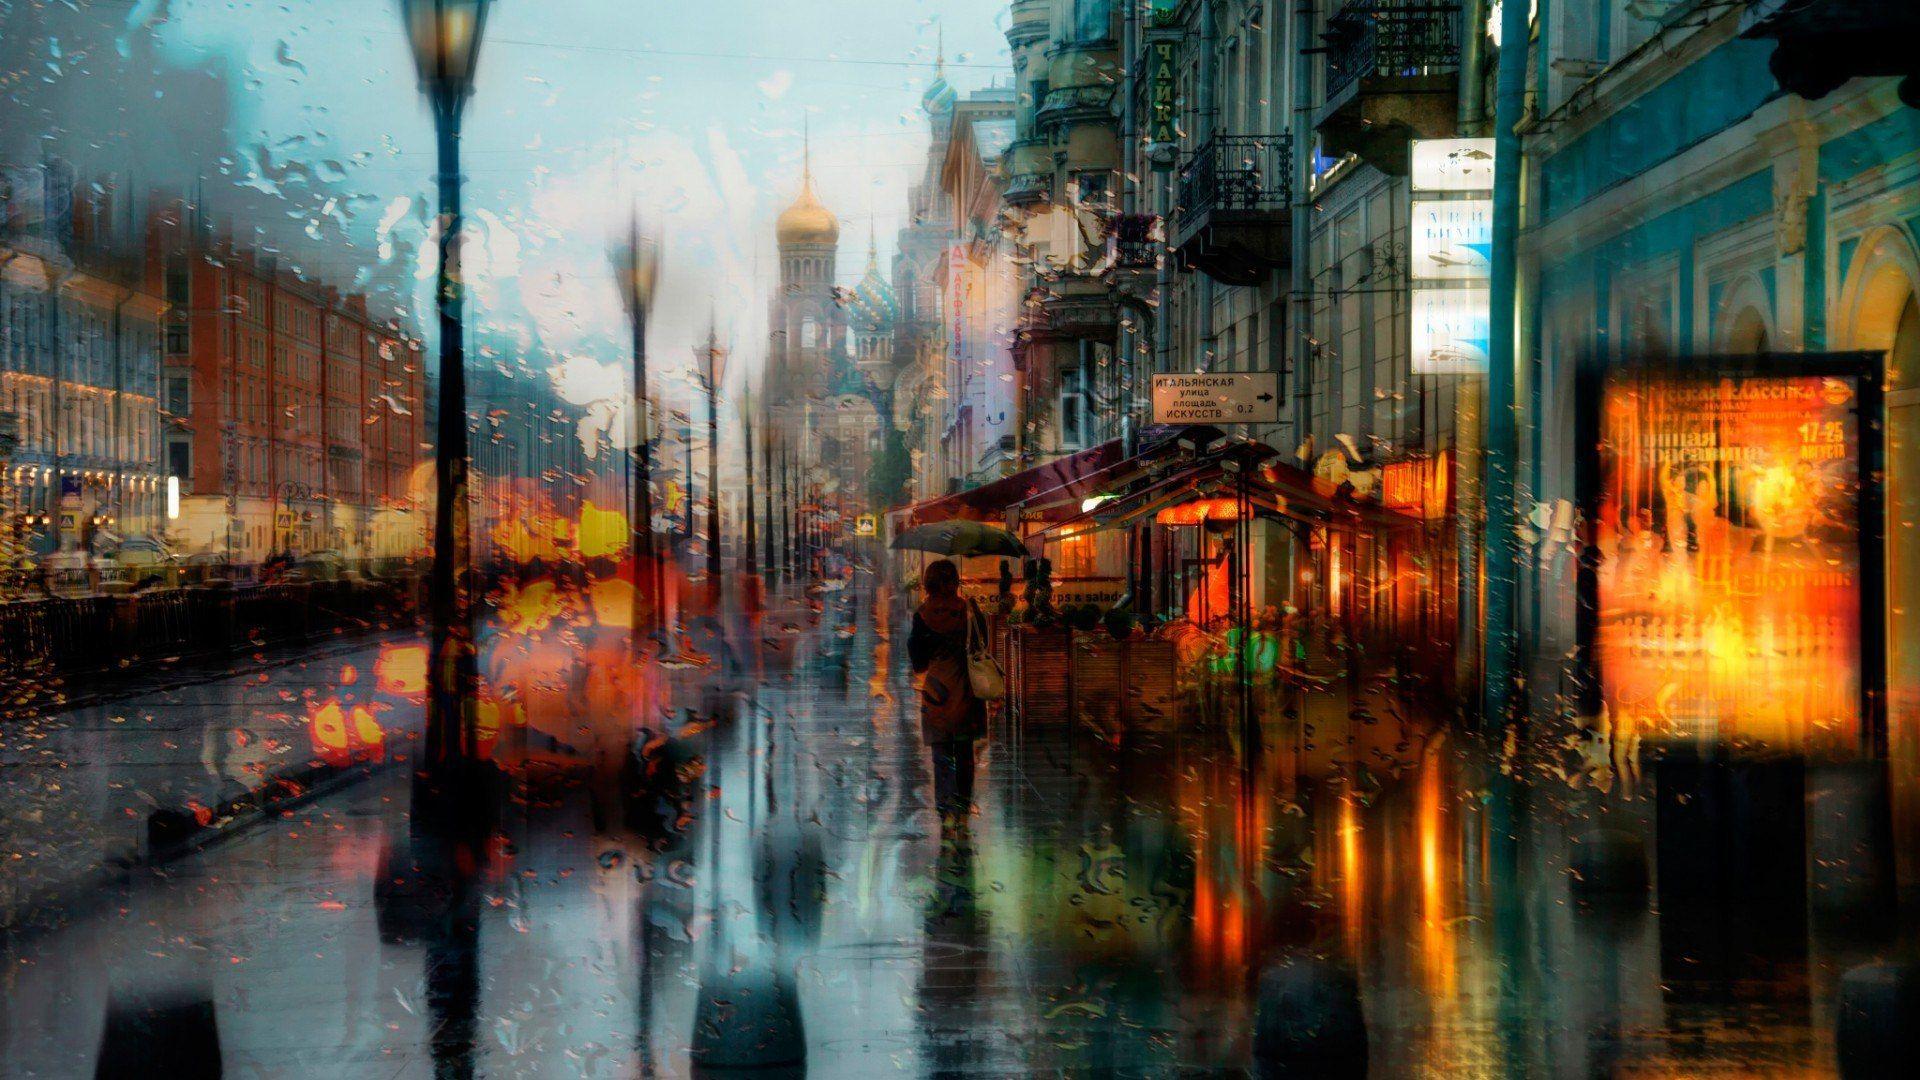 Rain in St. Petersburg wallpaper and image, picture